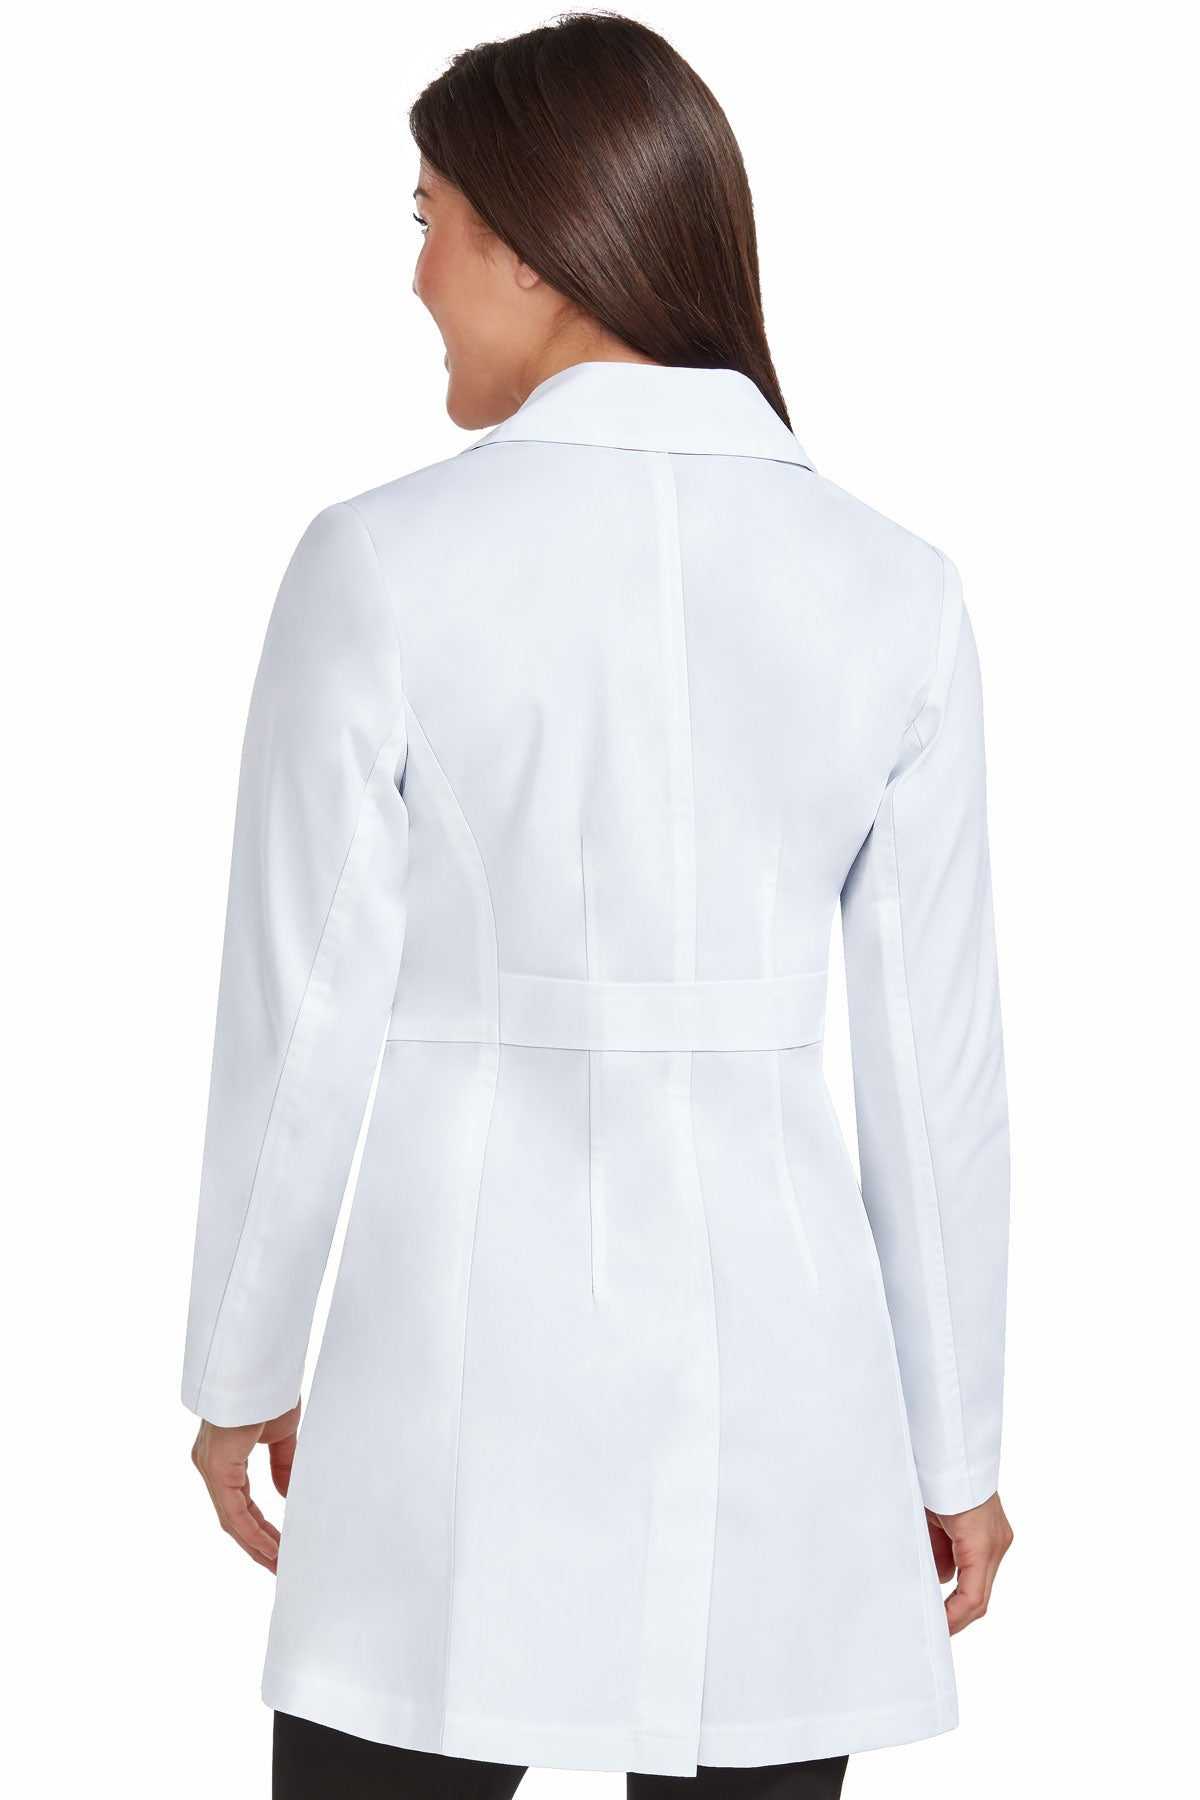 MED COUTURE 33 In. Mid Length Lab Coat